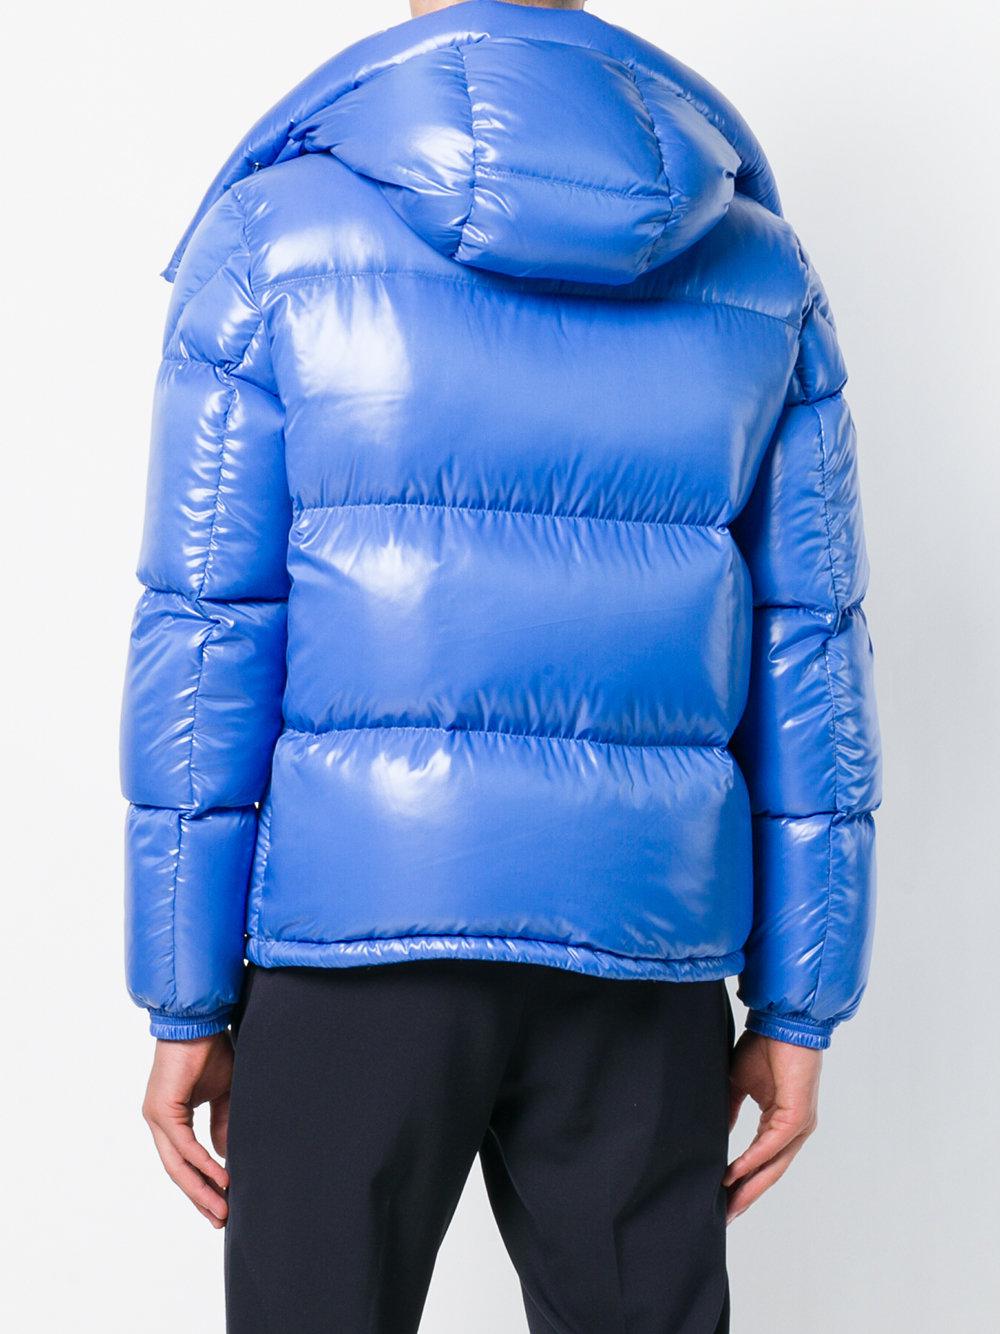 moncler blue puffer jacket,OFF 69%,www.concordehotels.com.tr